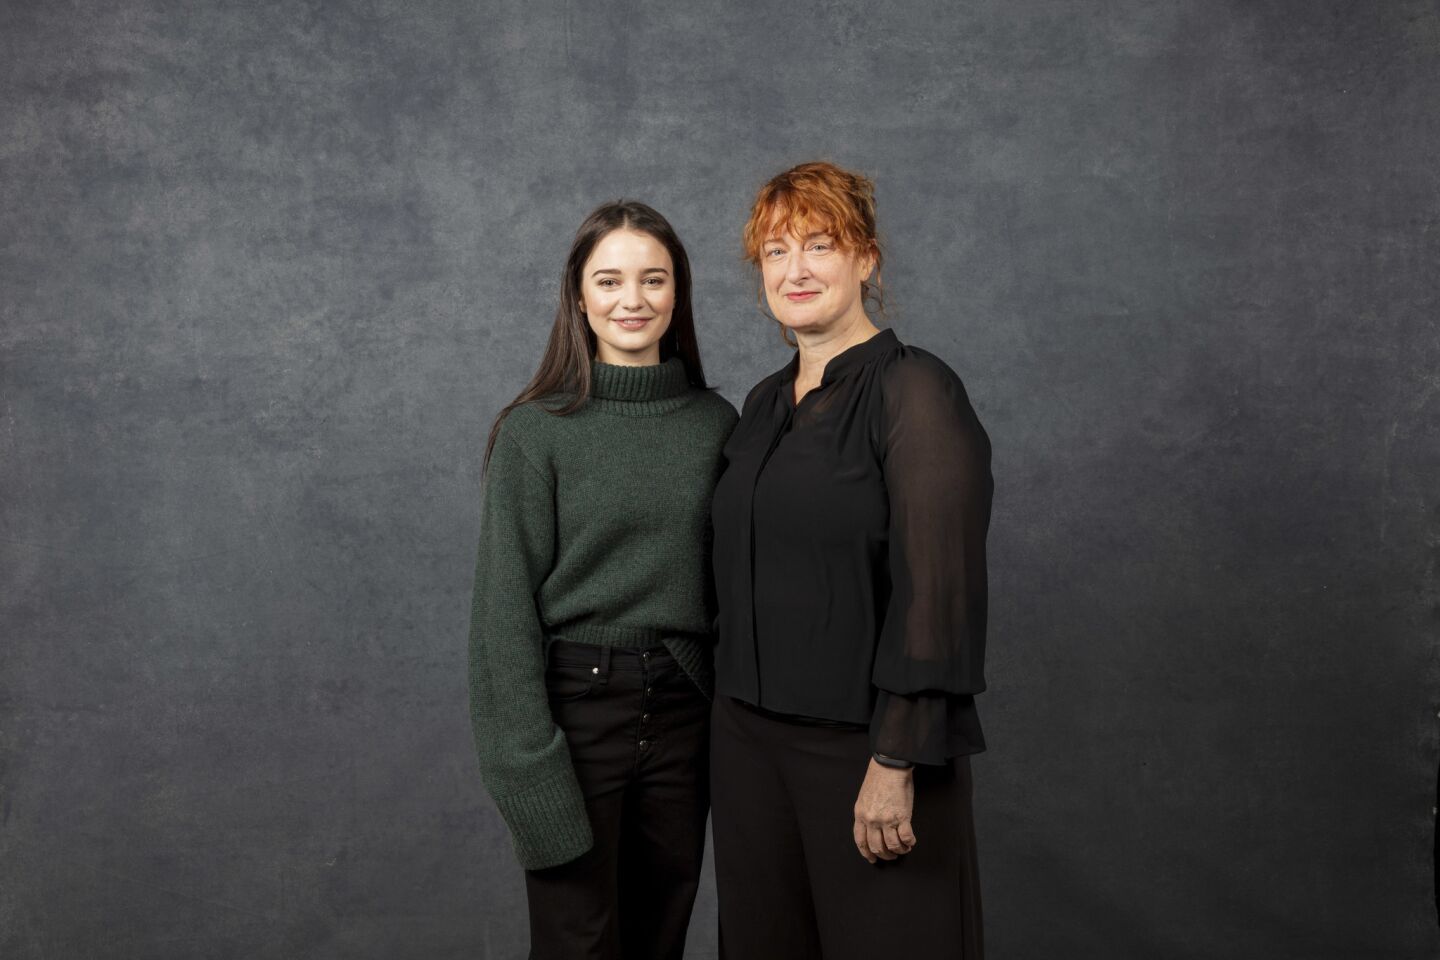 Actor Aisling Franciosi, left, and director Jennifer Kent, from the film "The Nightingale," photographed at the 2019 Sundance Film Festival in Park City, Utah, on Friday, Jan. 25.